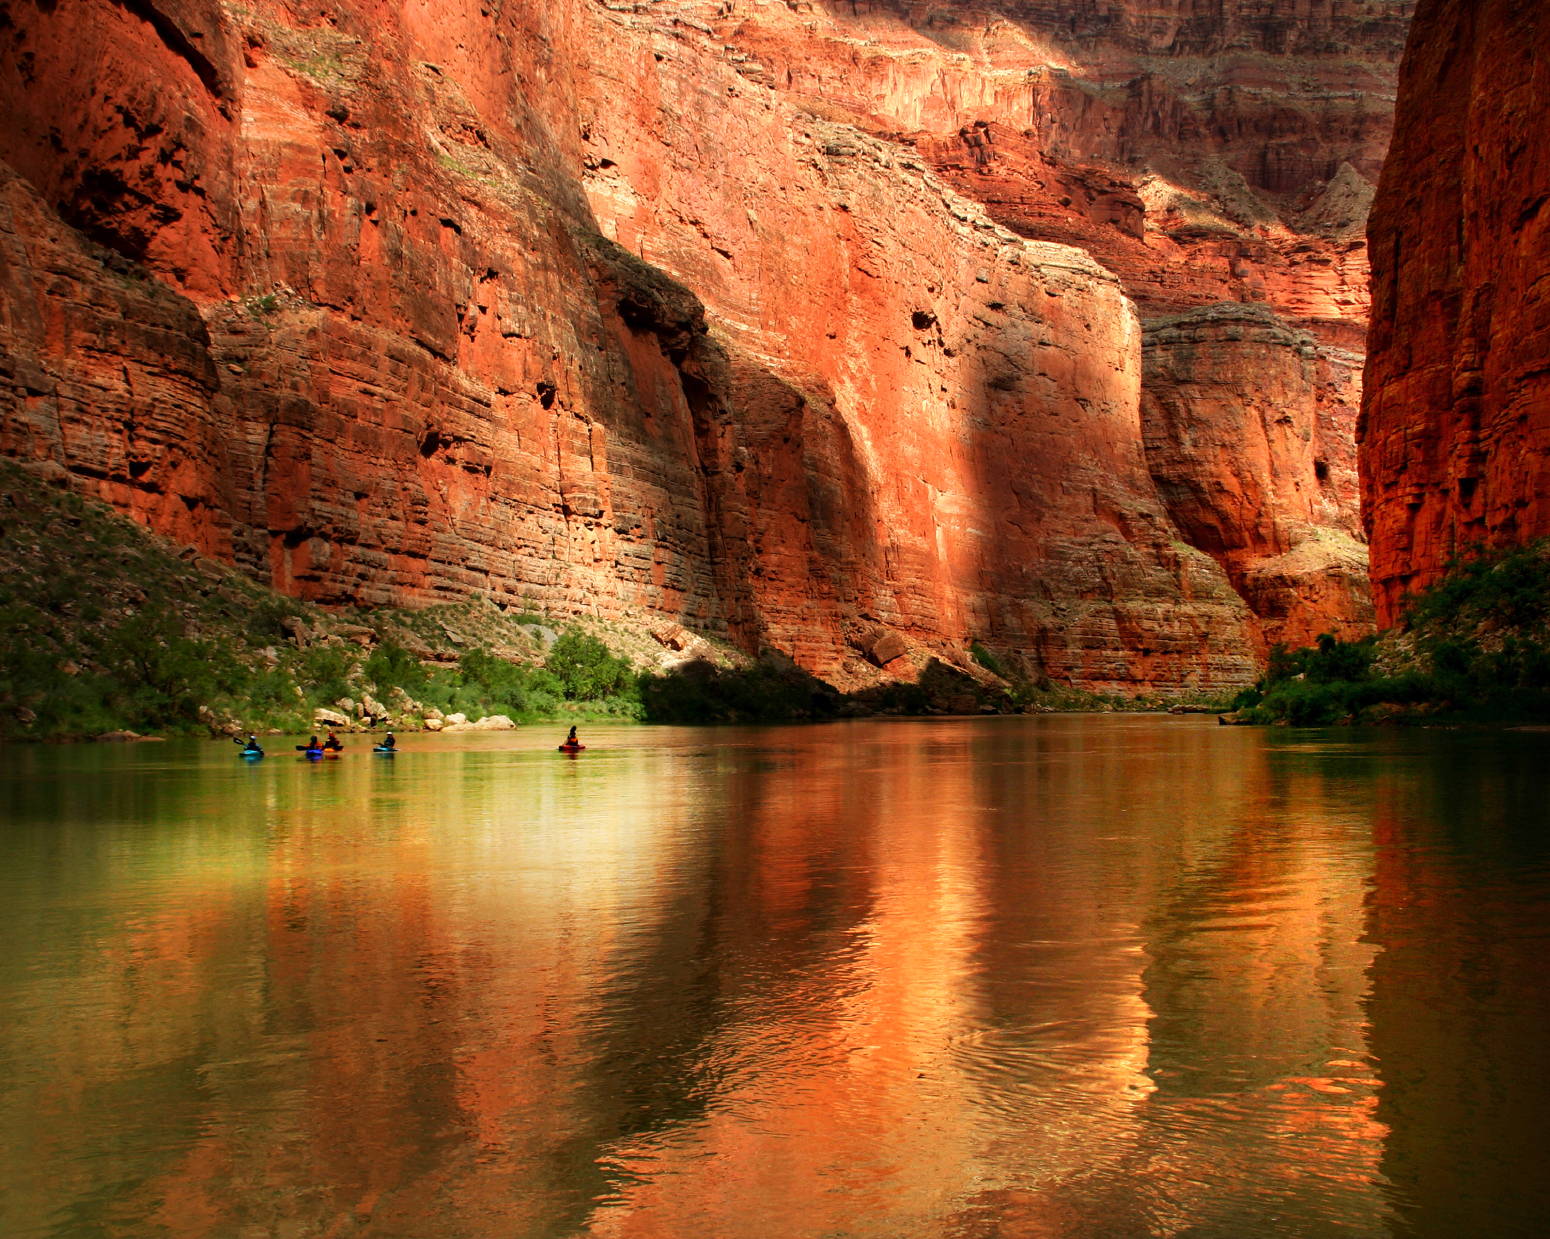 Your odds of getting a Grand Canyon river permit are slim.